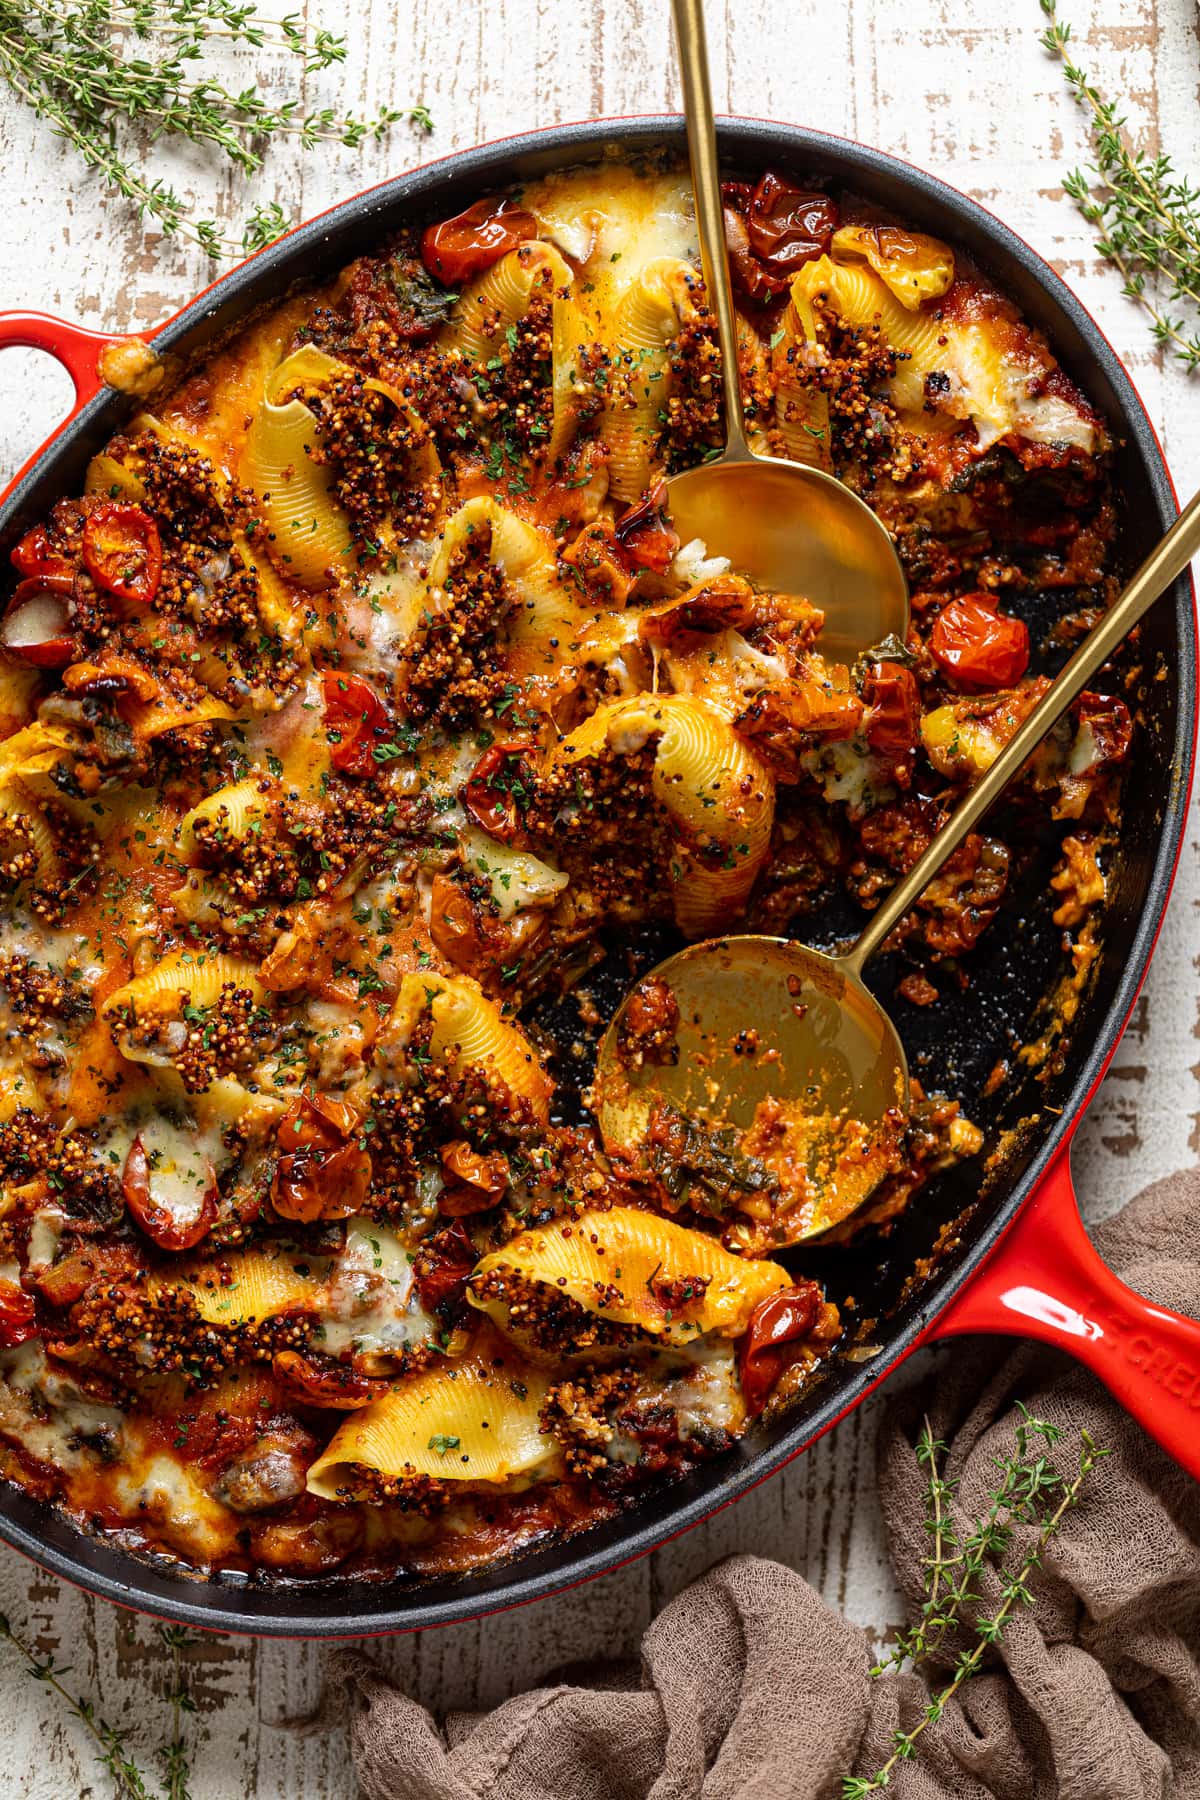 Two serving spoons in an oblong pan of Butternut Squash Stuffed Shells with Quinoa and Kale